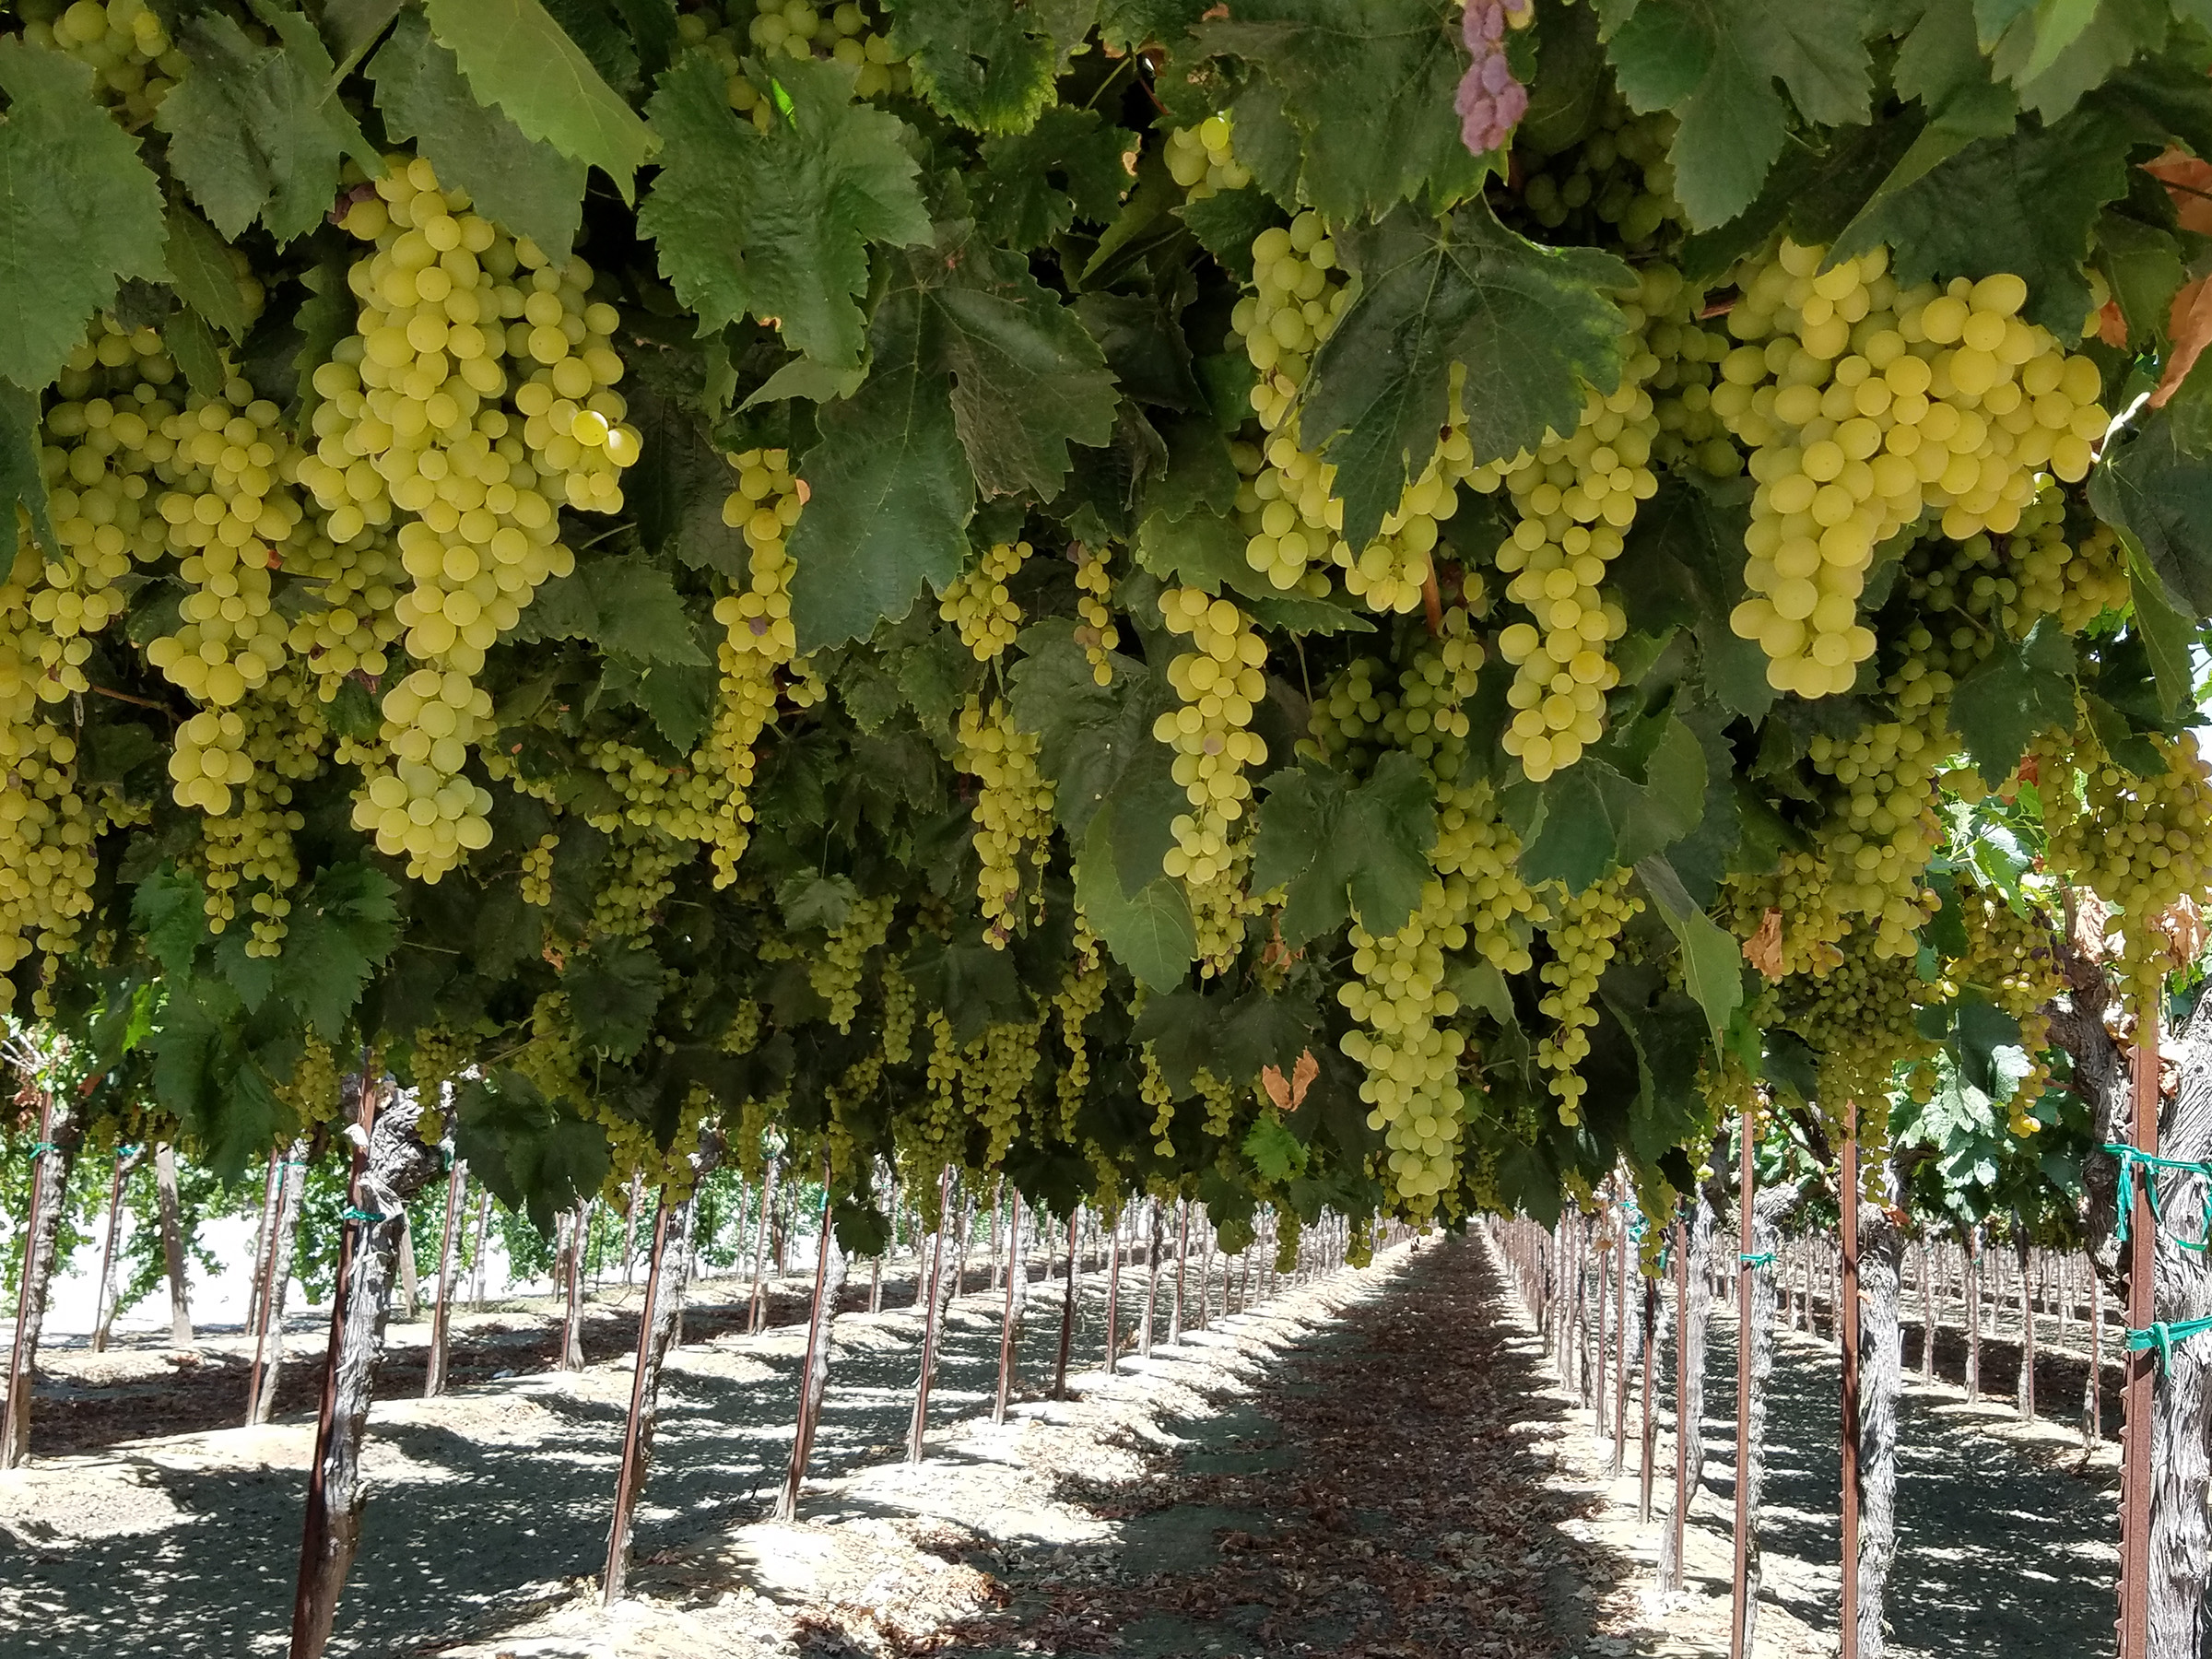 Green grapes hanging from rows of vines in a vineyard